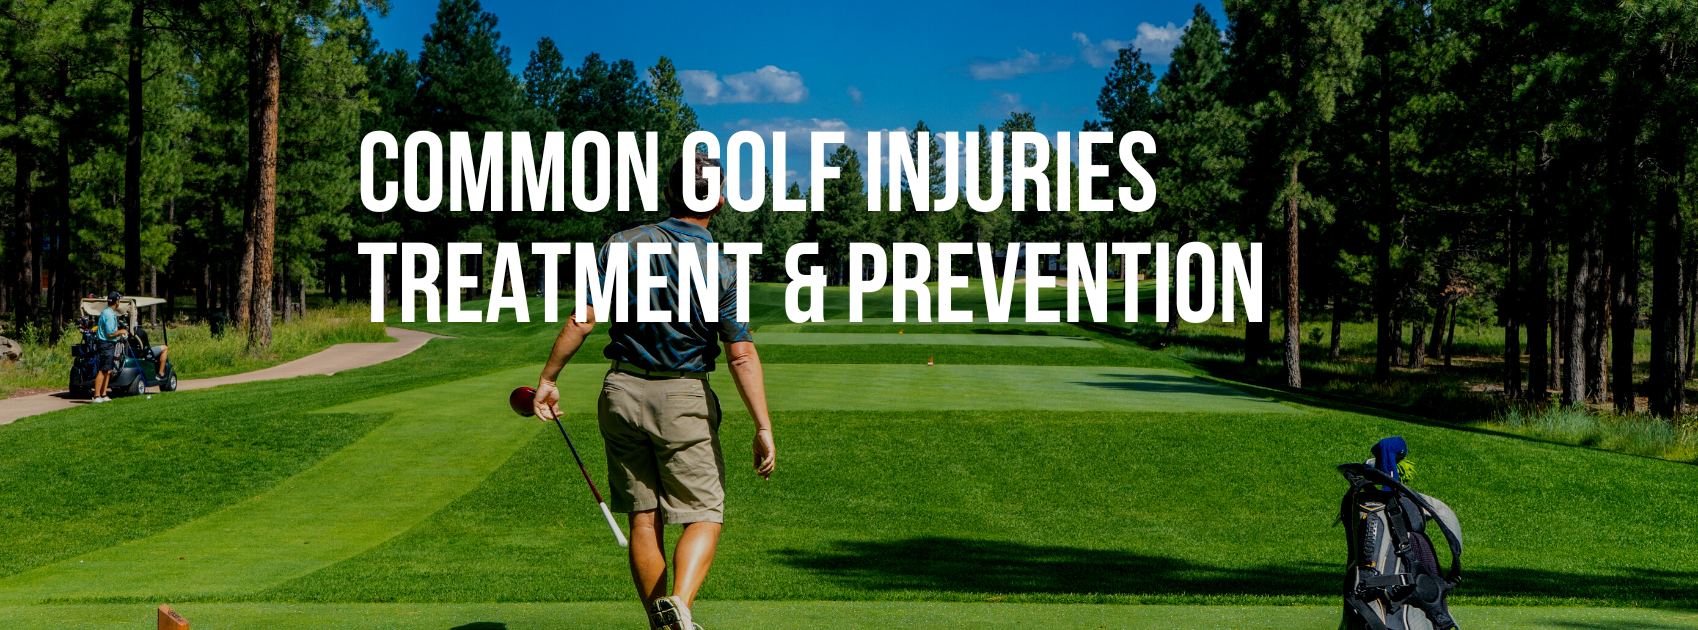 Common Golf Injuries - Treatment & Prevention